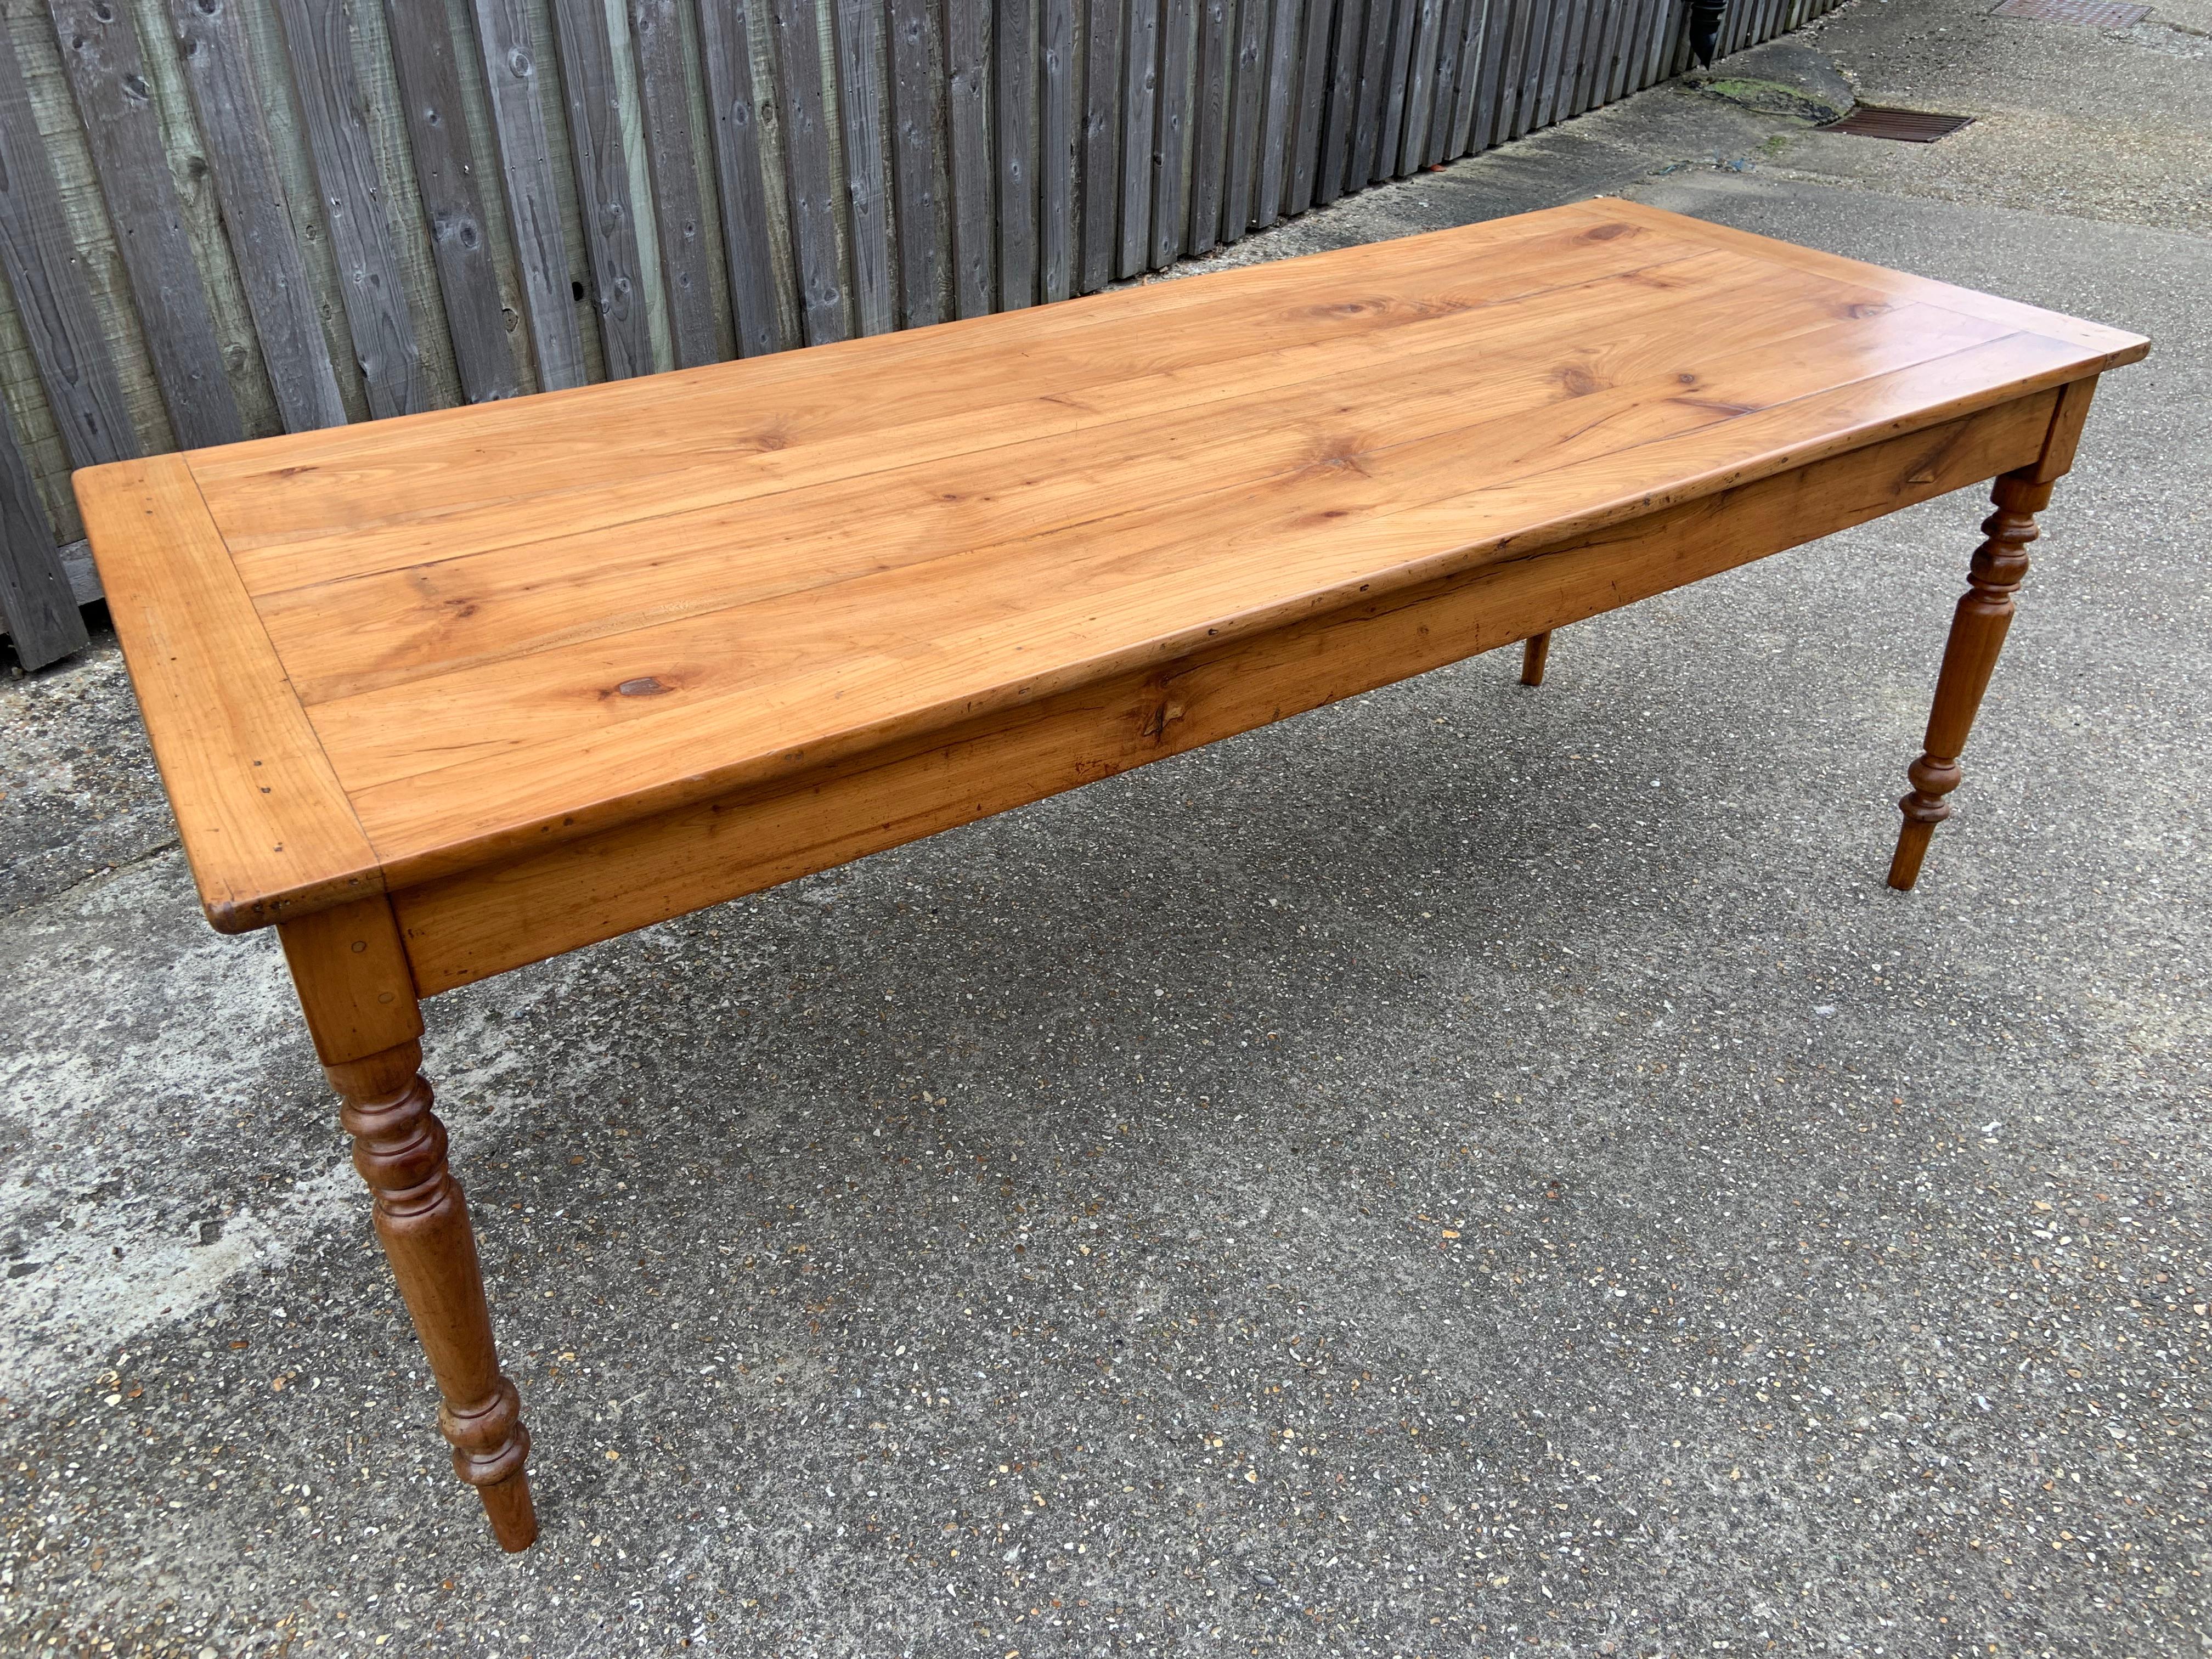 Hand-Crafted Late 19th Century Pale Cherry Farmhouse Table with Slide